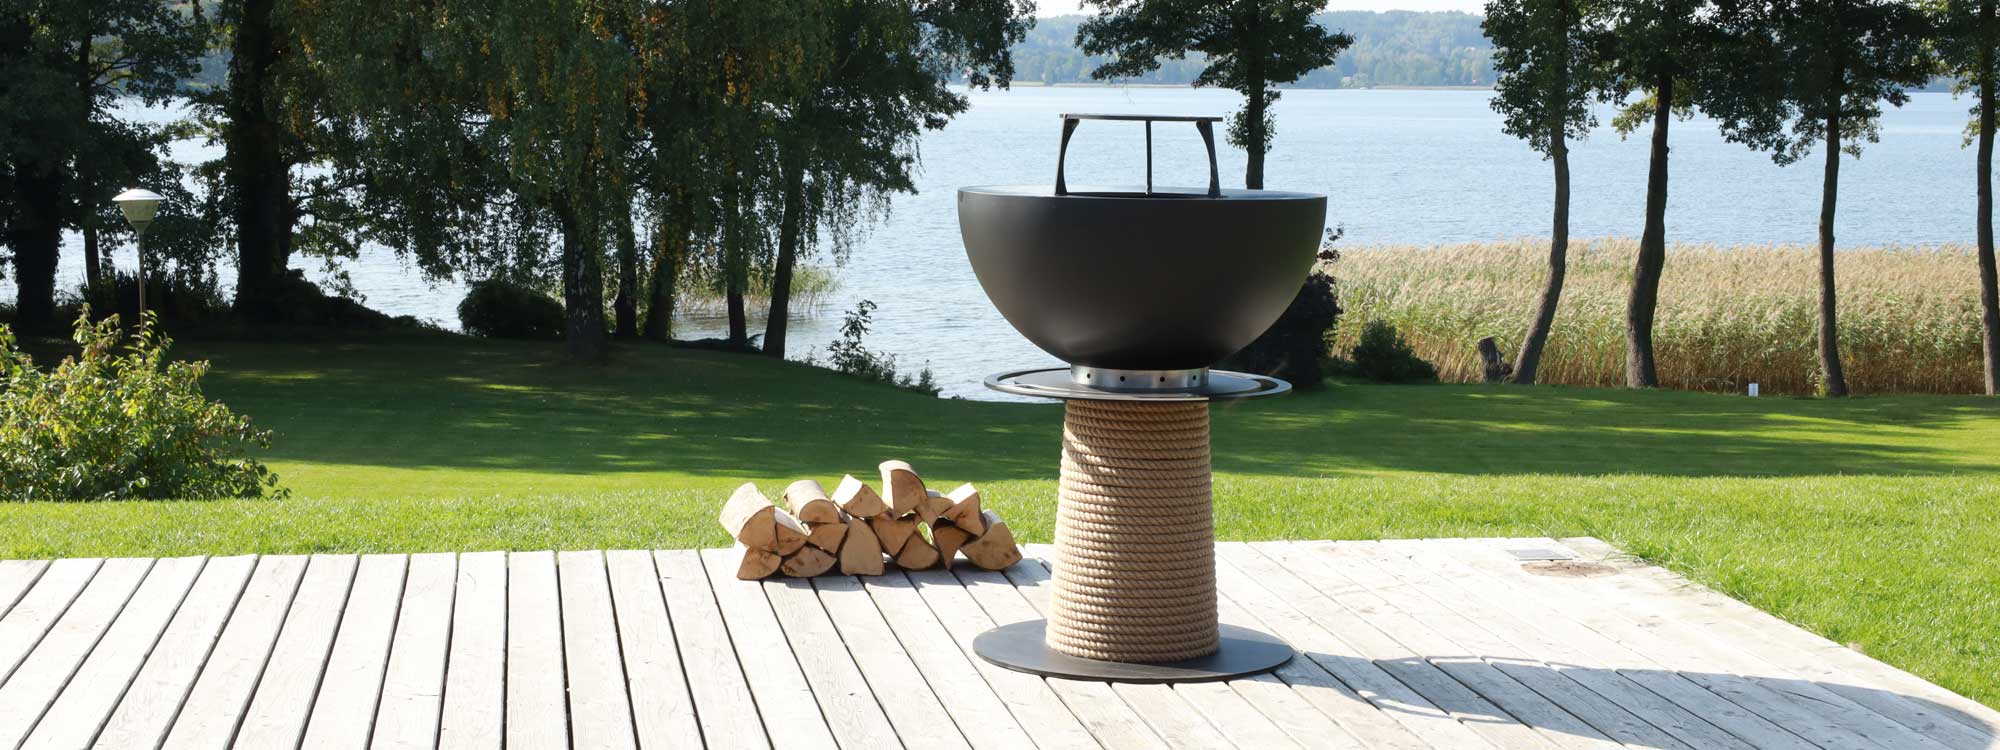 Black Stainless Steel Lighthouse GARDEN FIREPLACE & GRILL Is A MODERN BBQ In HIGH QUALITY Barbecue Materials By Masuria LUXURY OUTDOOR GRILL Company, Poland.